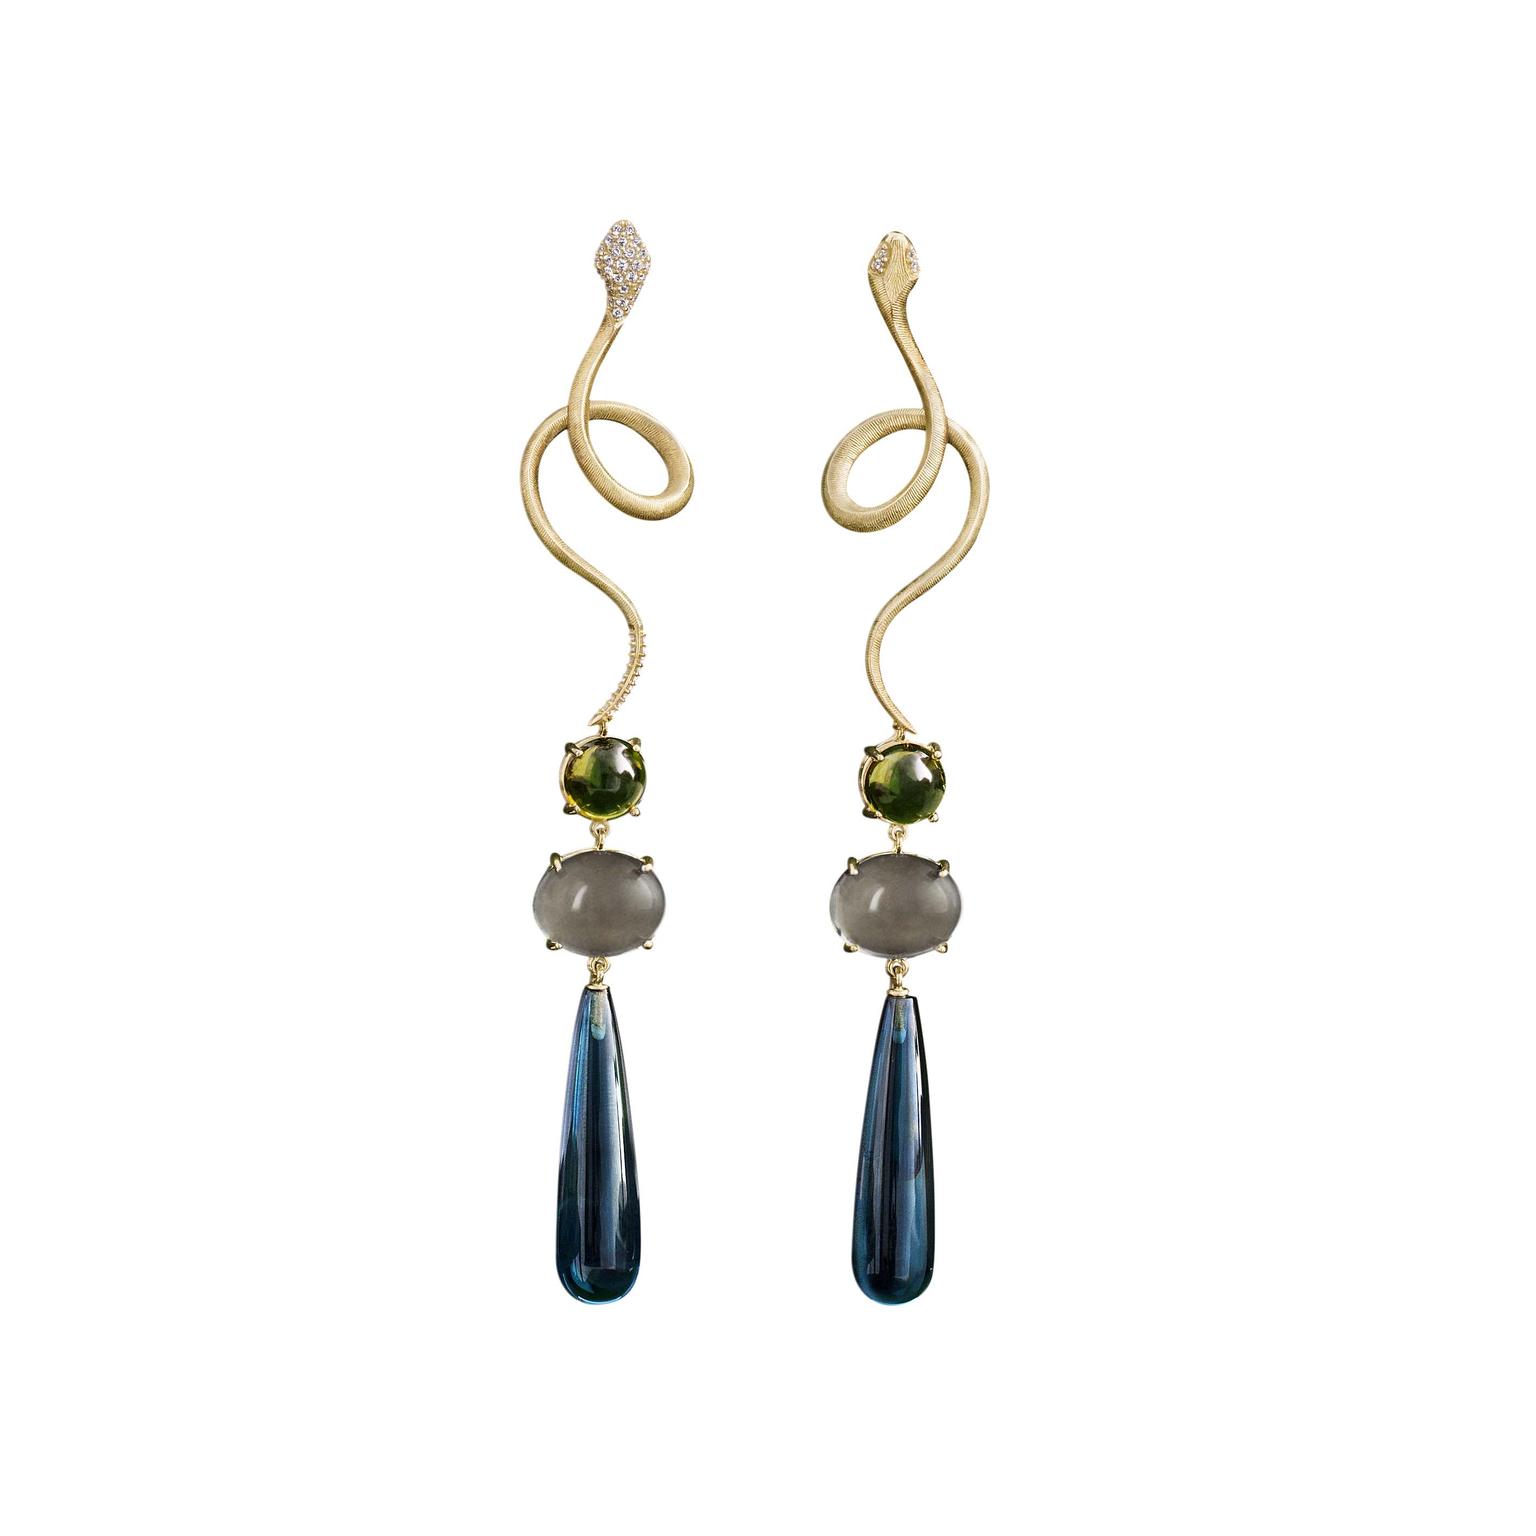 Ole Lynggaard snake earrings in brushed gold with diamonds and coloured gemstones.